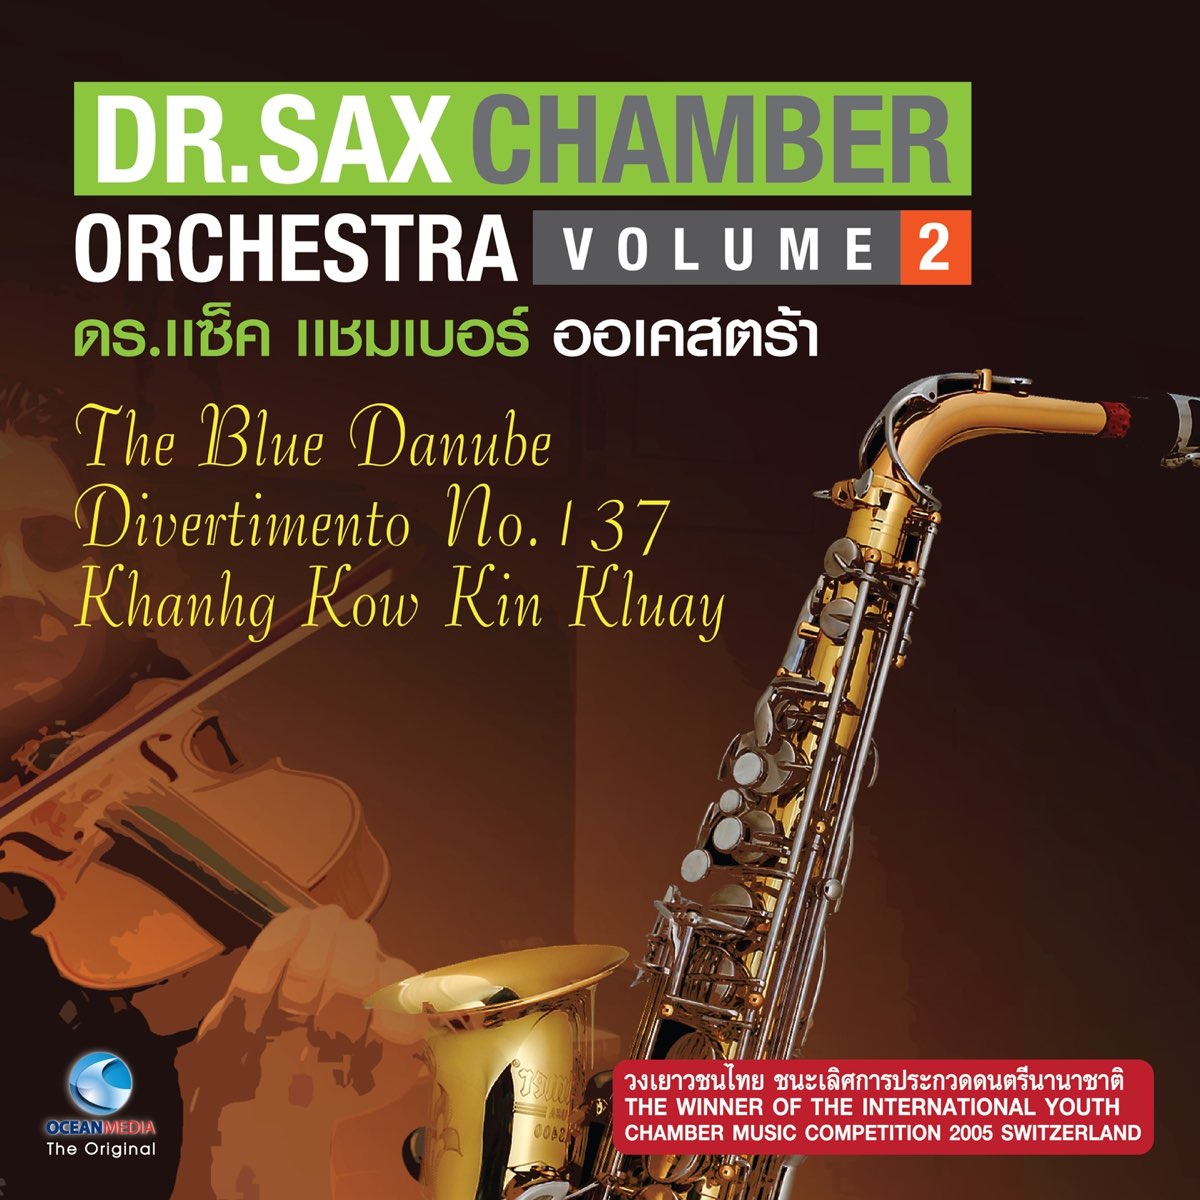 DR.SAX CHAMBER ORCHESTRA, Vol. 2 (The Blue Danube) by DR.SAX CHAMBER  ORCHESTRA on Apple Music